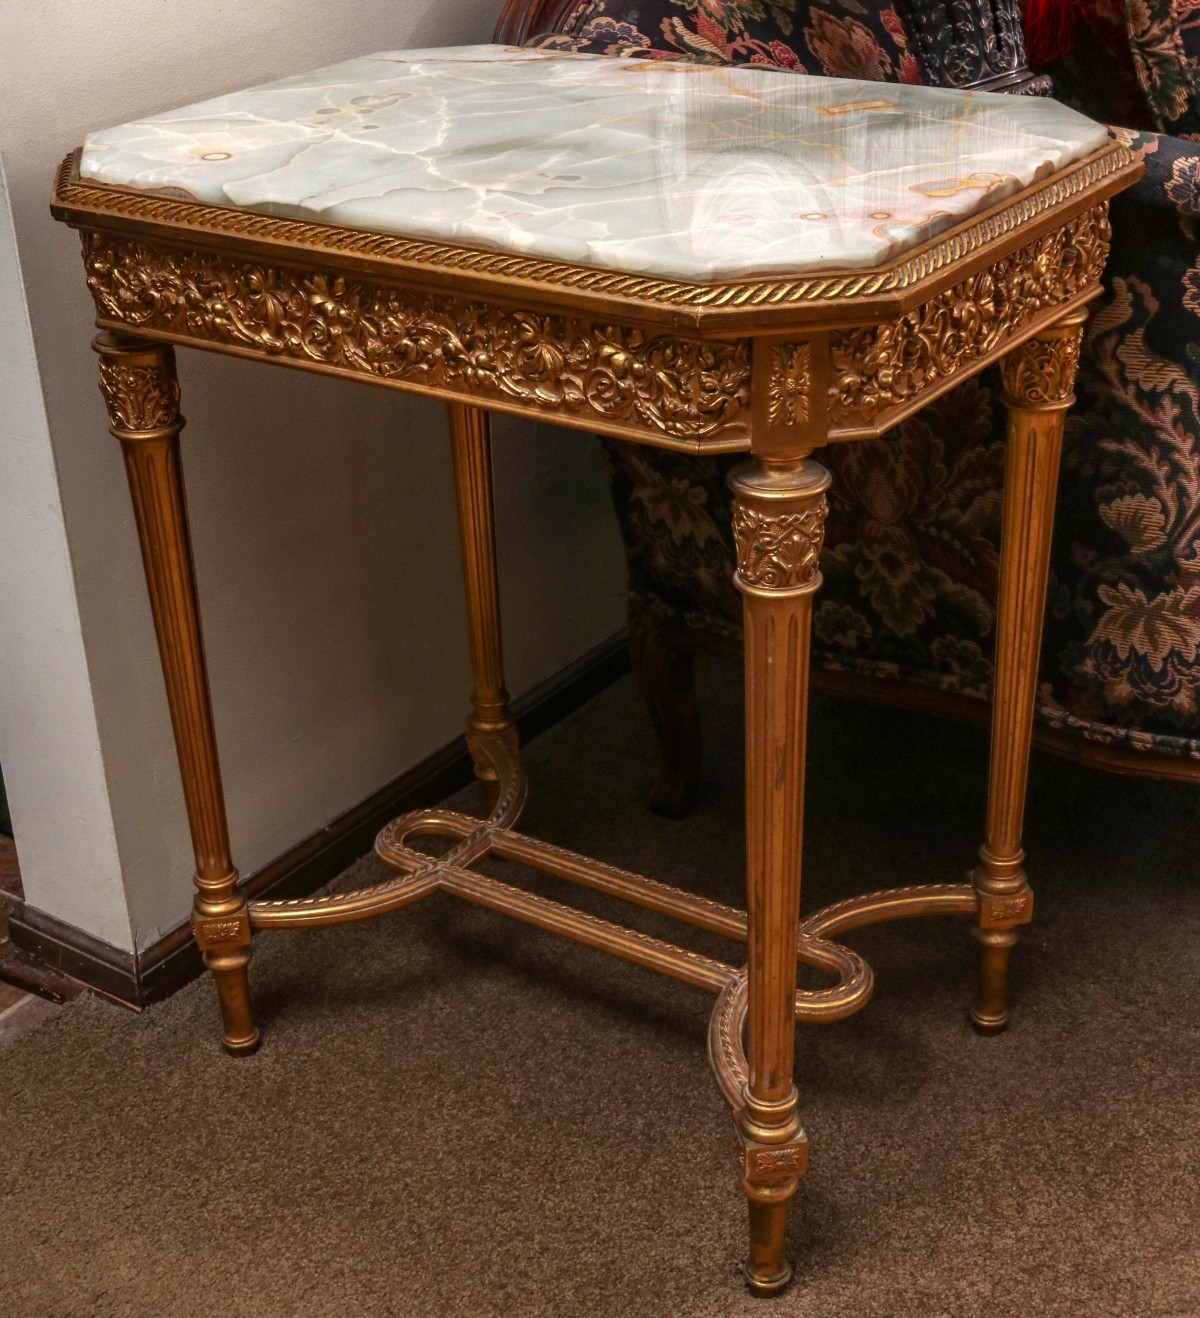 A 20TH CENTURY LOUIS XVI STYLE SIDE TABLE WITH ONYX TOP